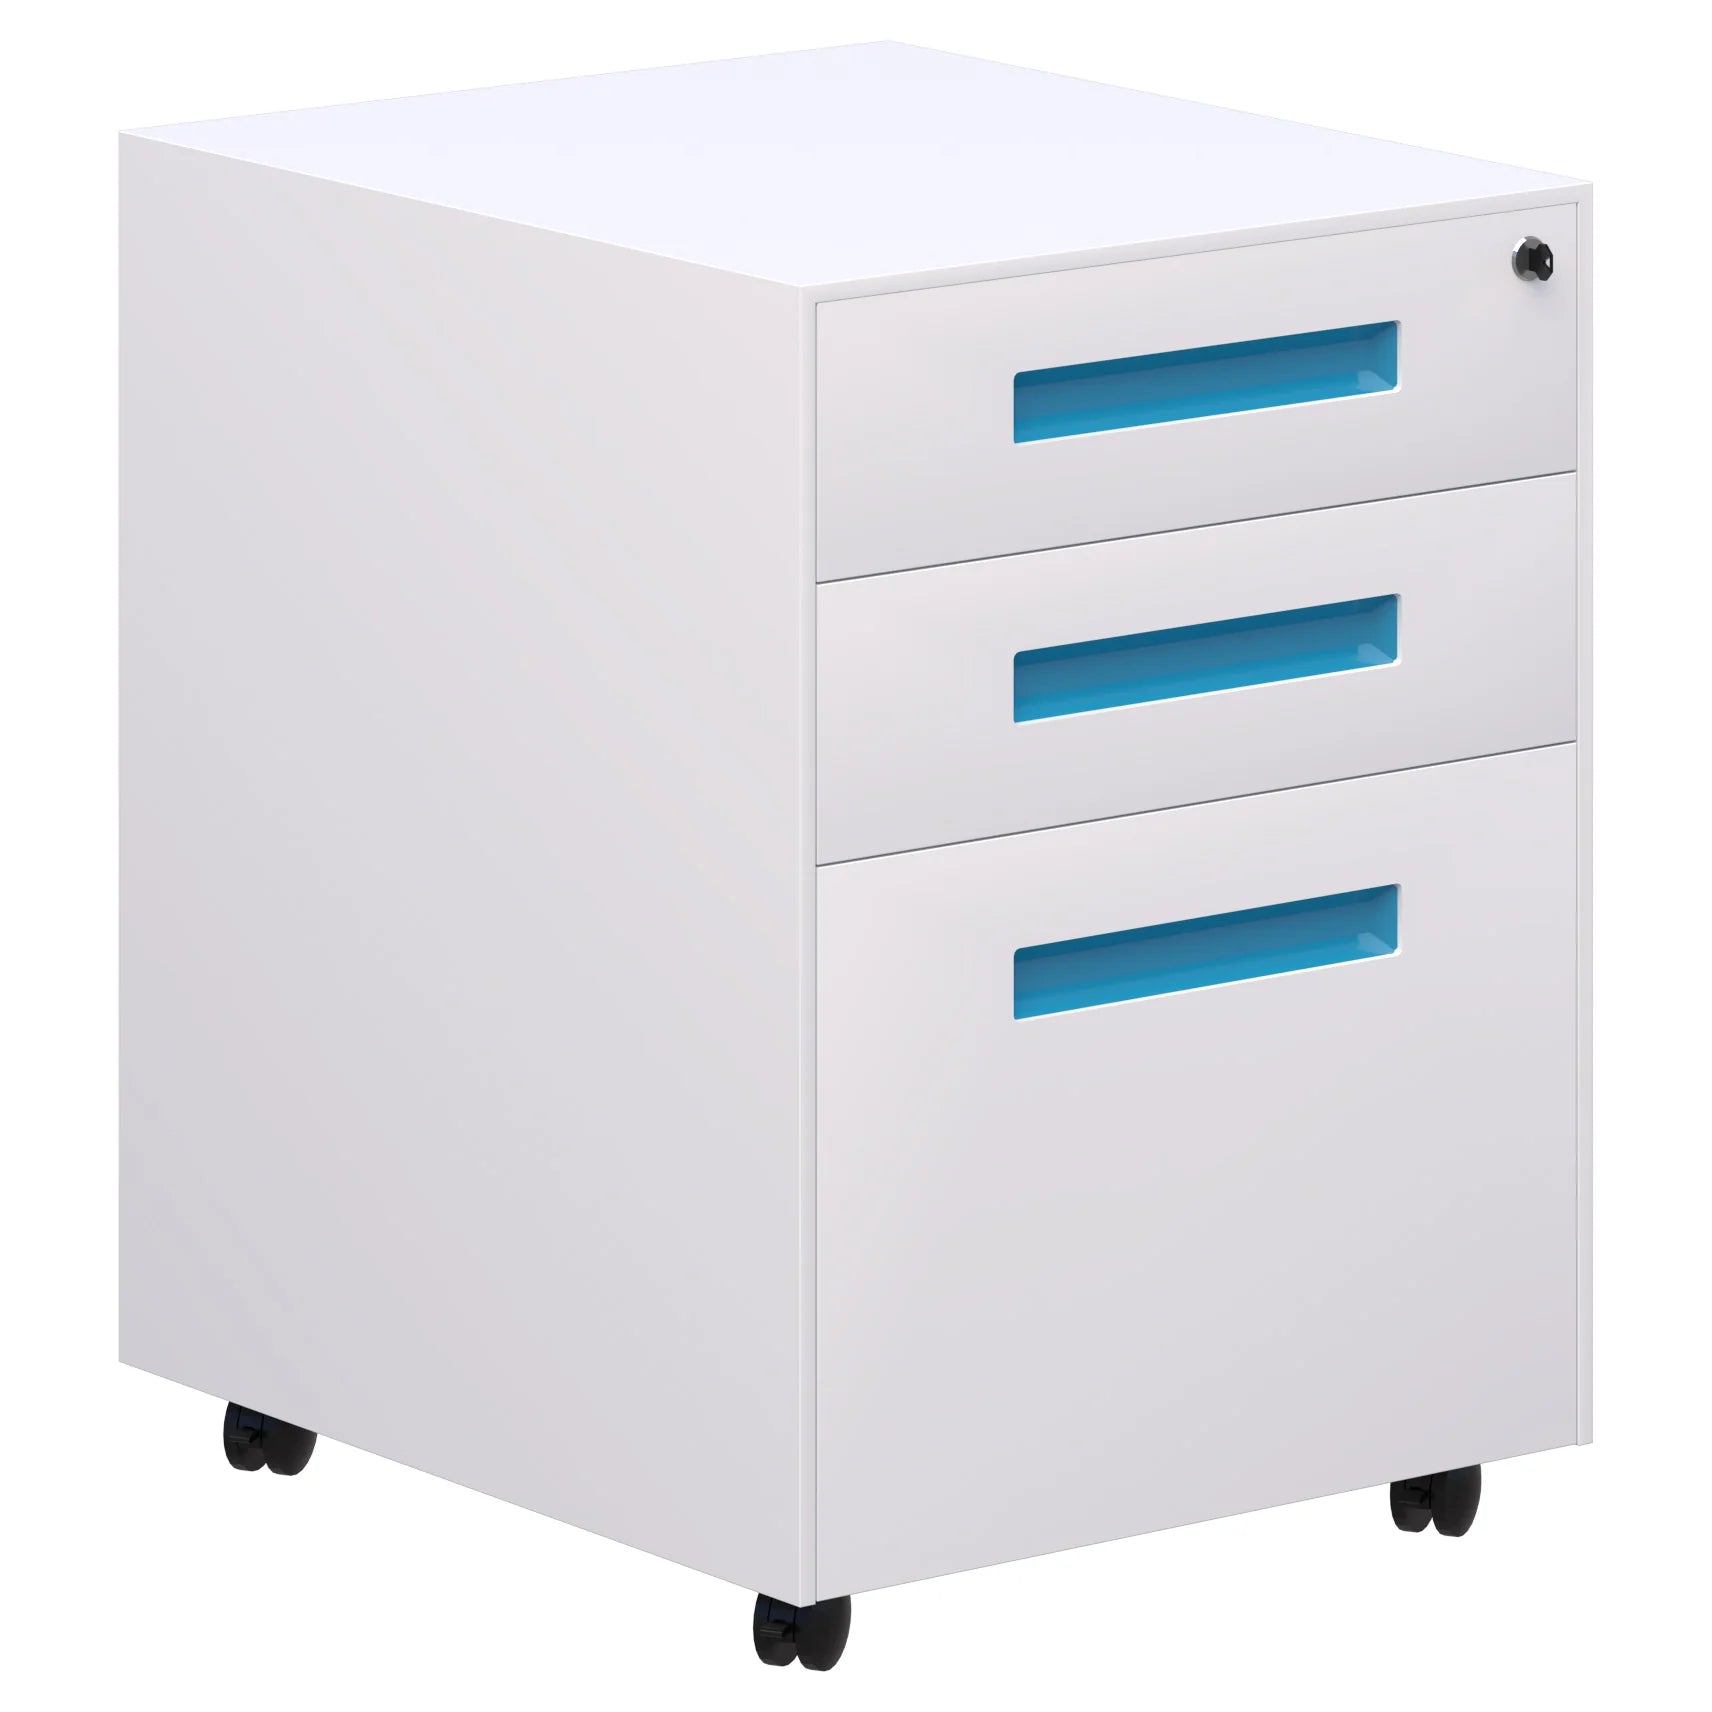 Lockable Spectrum metal mobile with two stationery drawers and 1 file draw in white with blue handles.